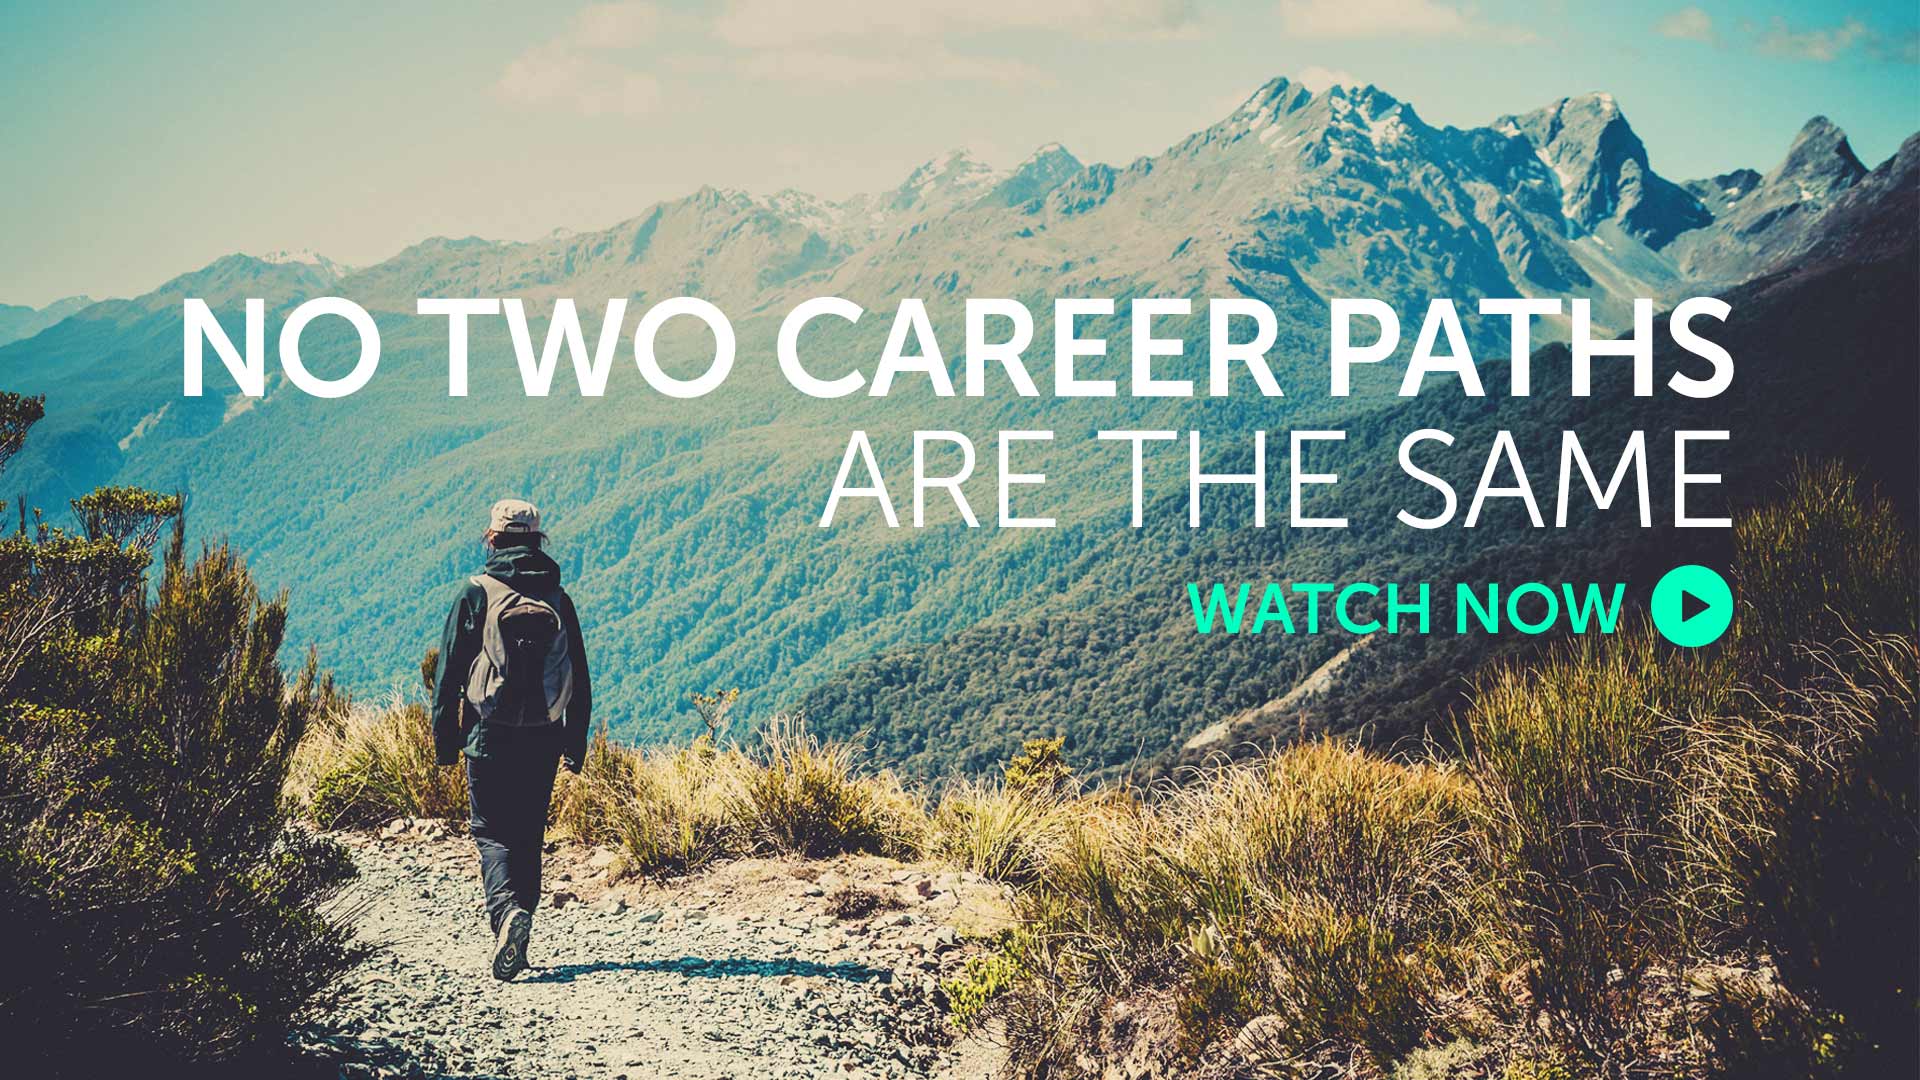 Briefing: No two career paths are the same